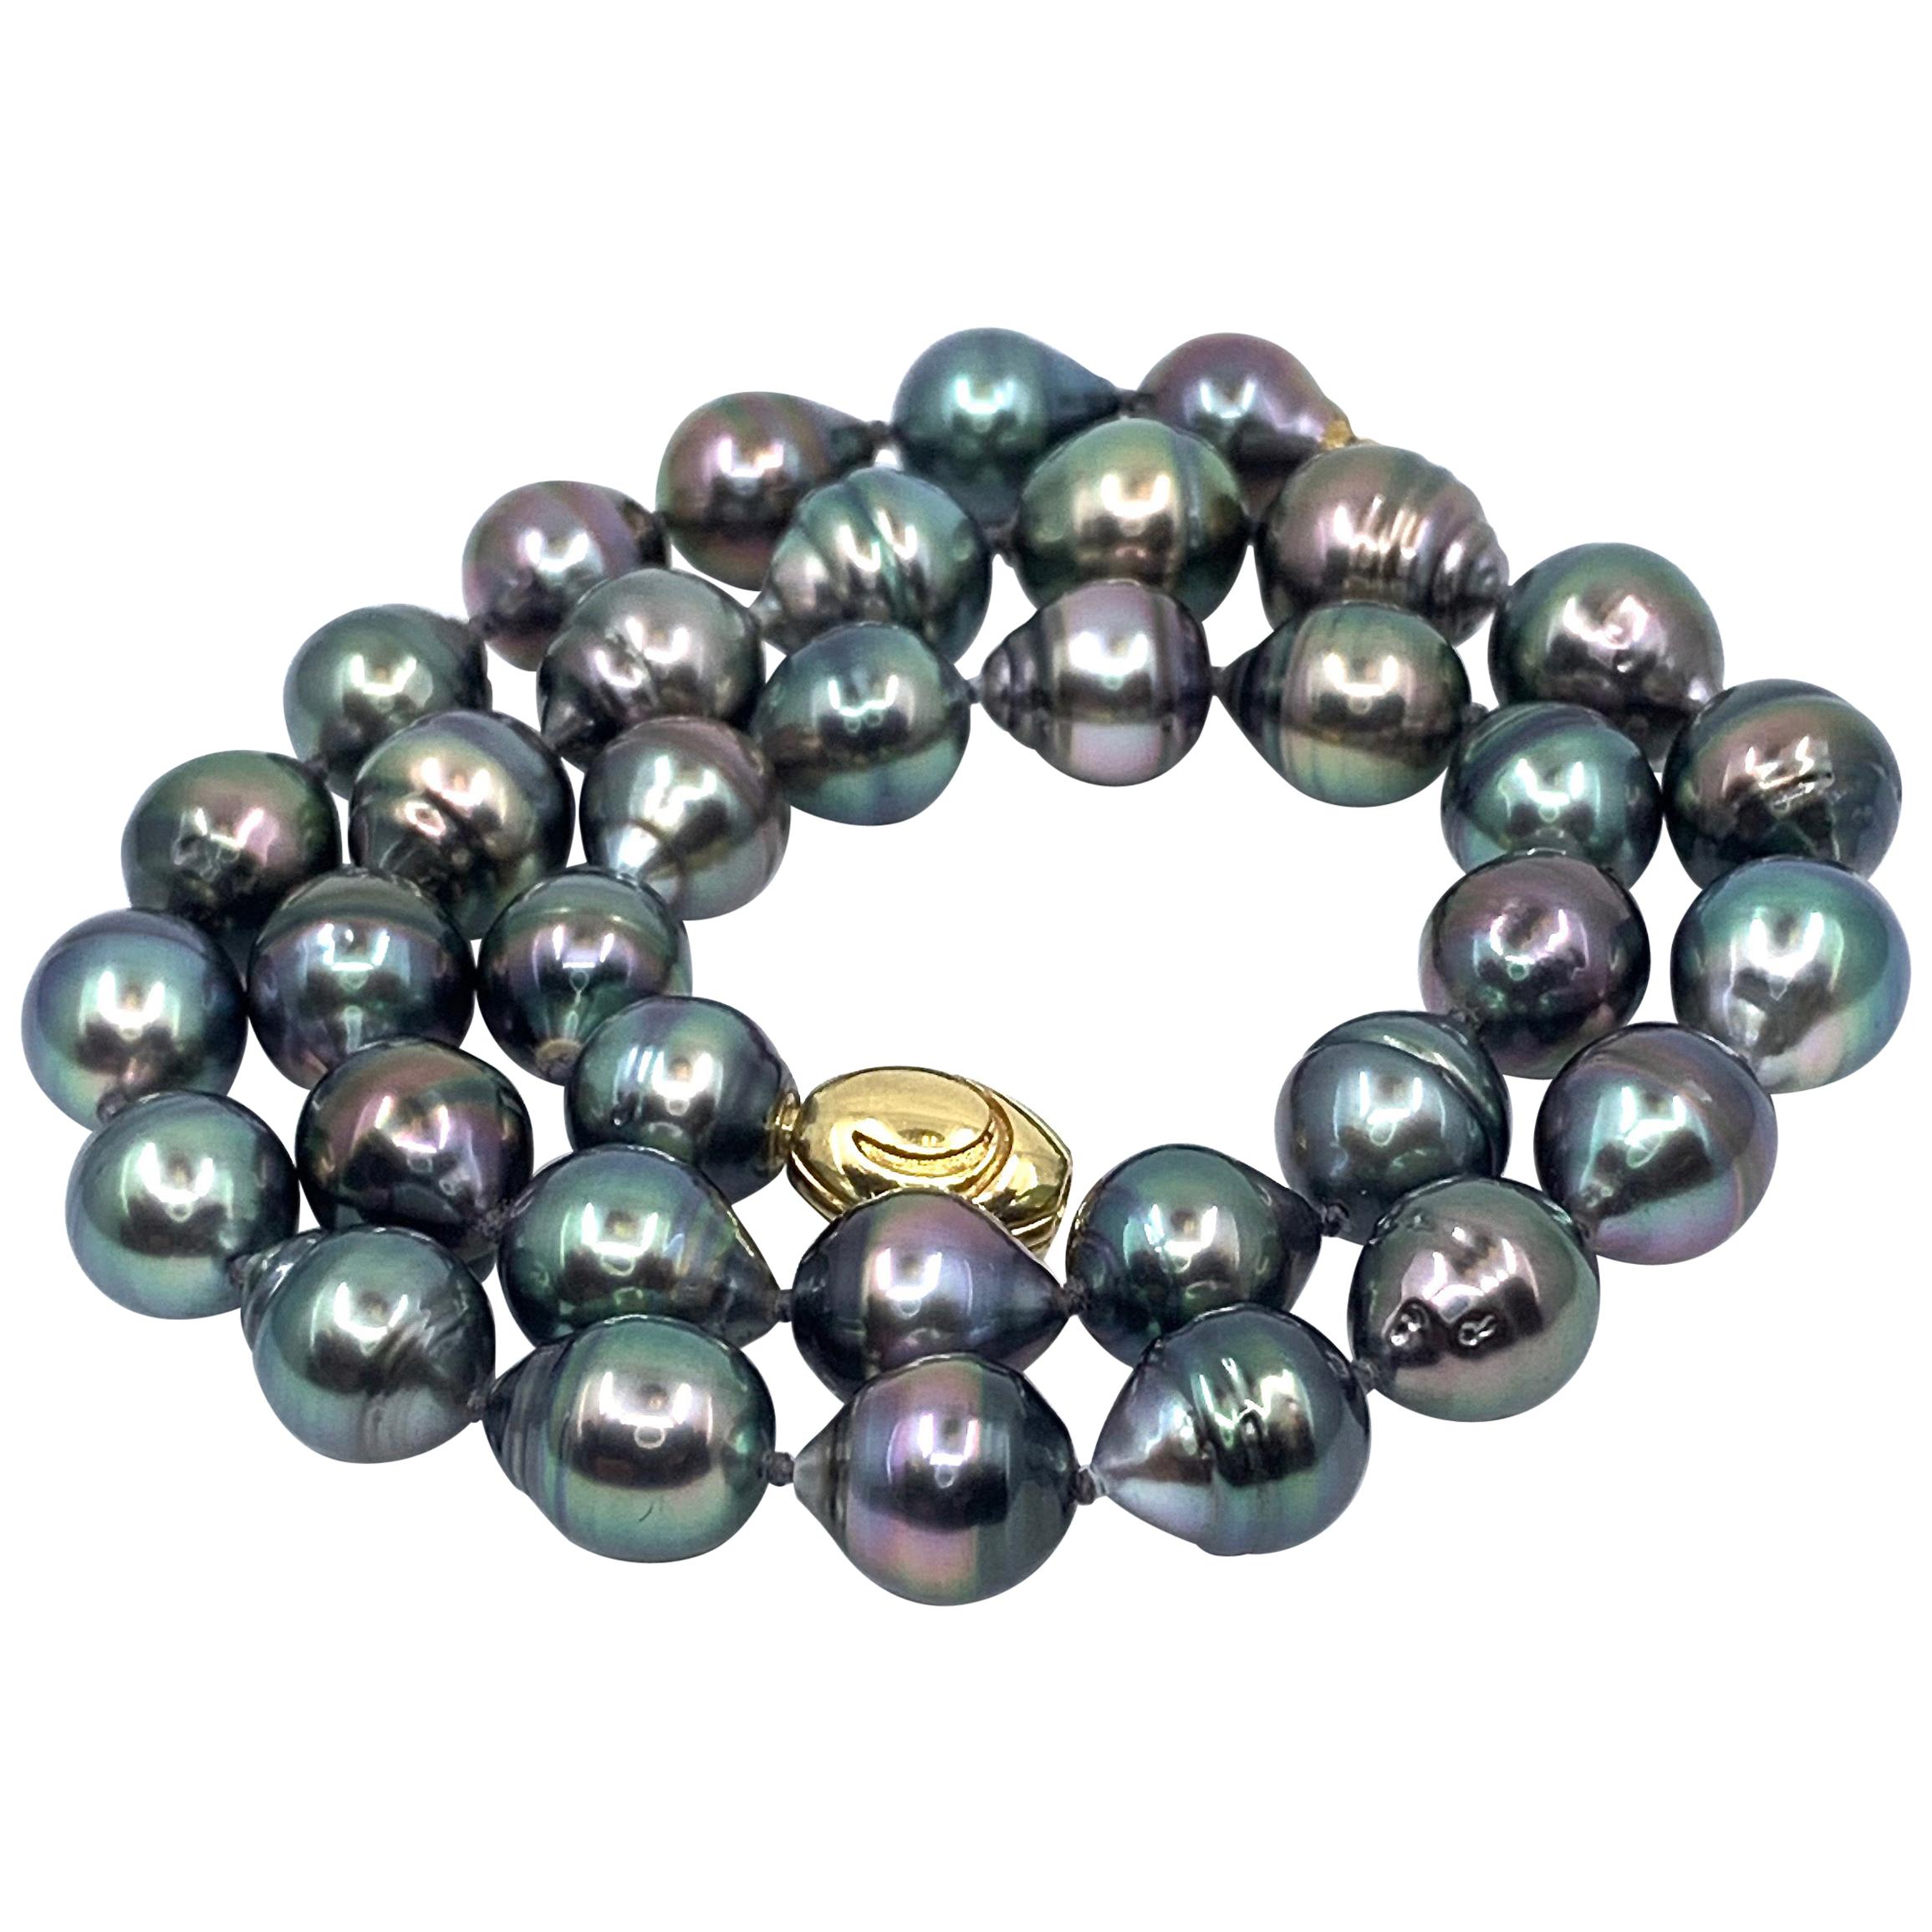 iridesse pearl necklace